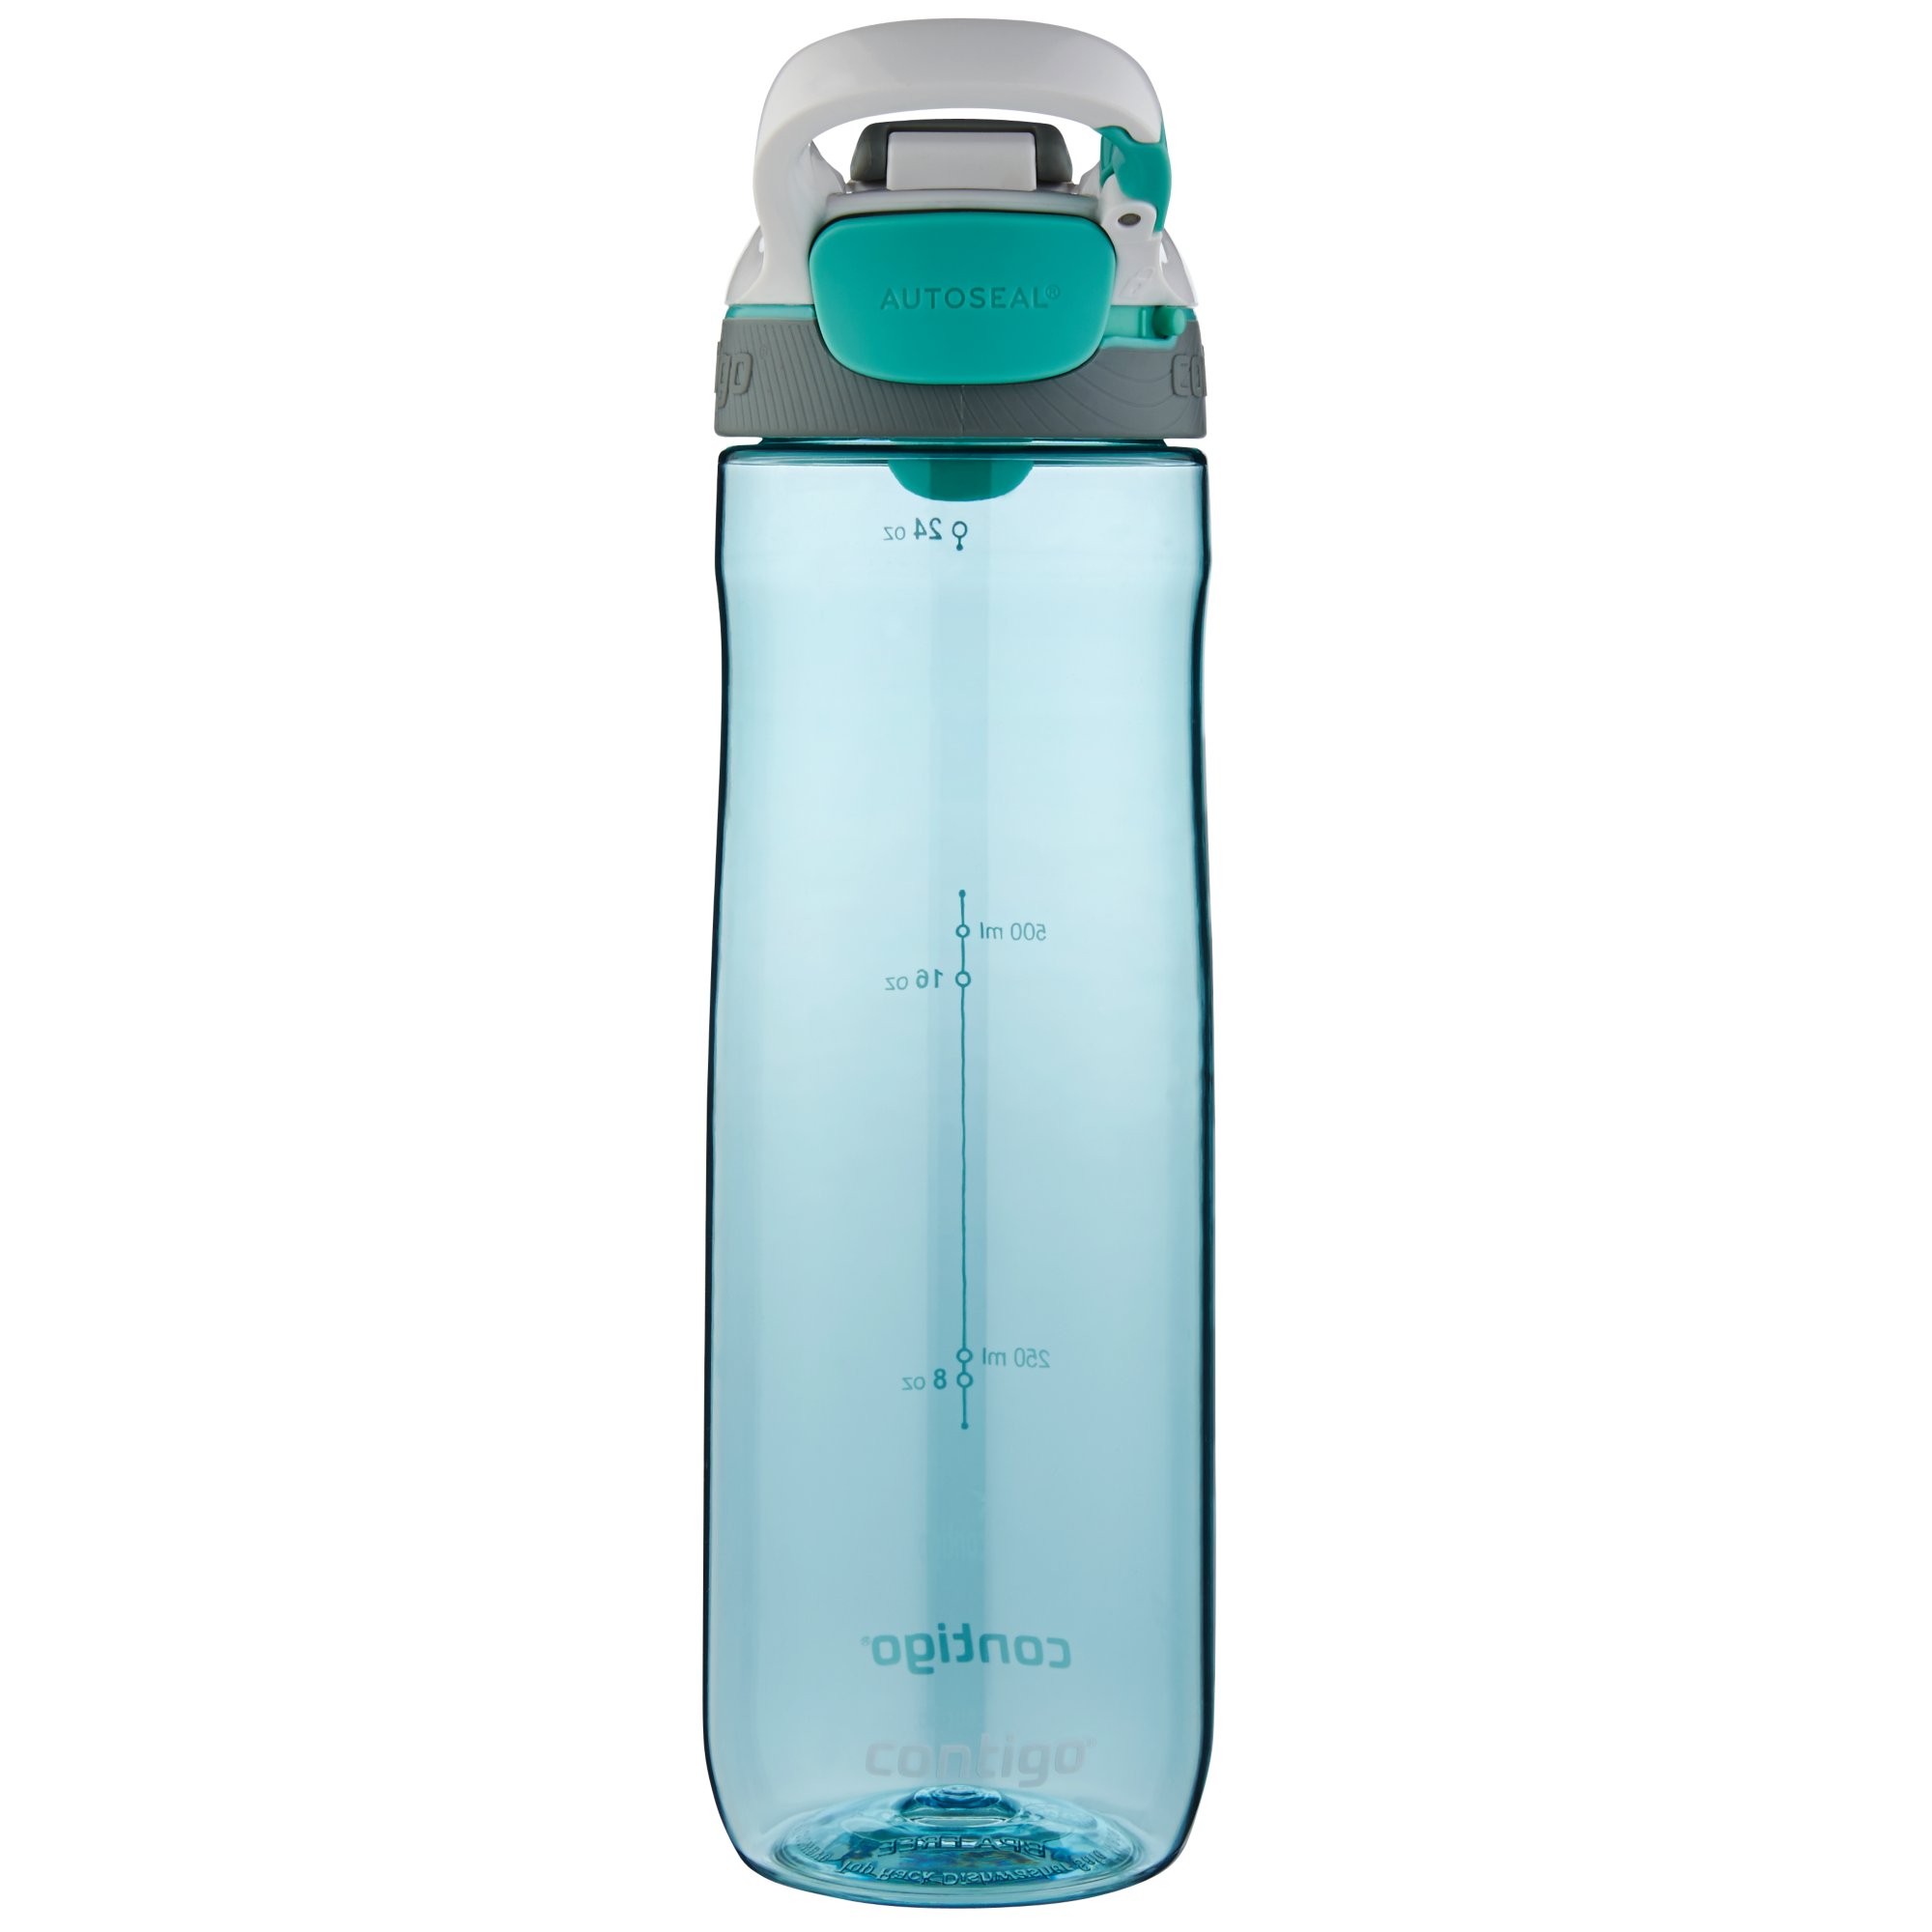  Contigo Cortland Spill-Proof Water Bottle, BPA-Free Plastic  Water Bottle with Leak-Proof Lid and Carry Handle, Dishwasher Safe : Sports  & Outdoors